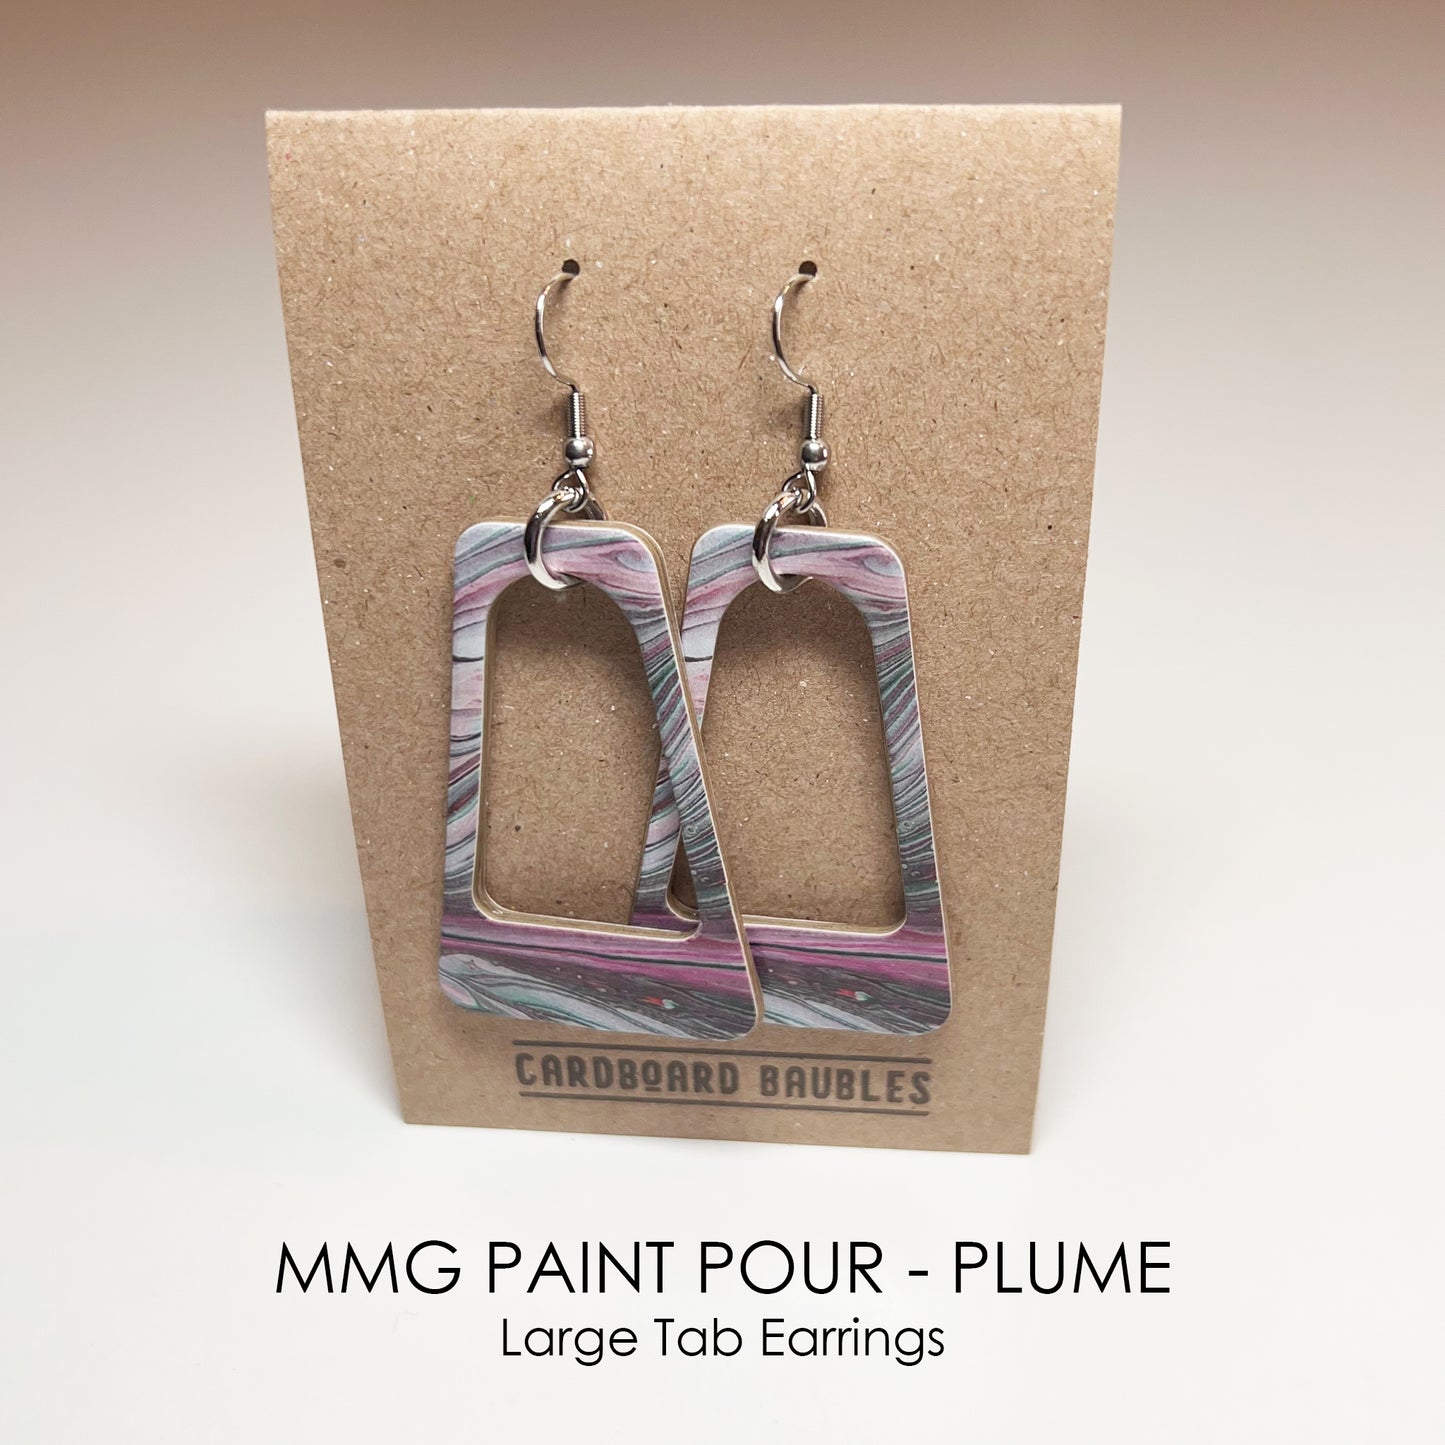 MMG PAINT POUR - PLUME - Tab Cardboard Baubles Earrings